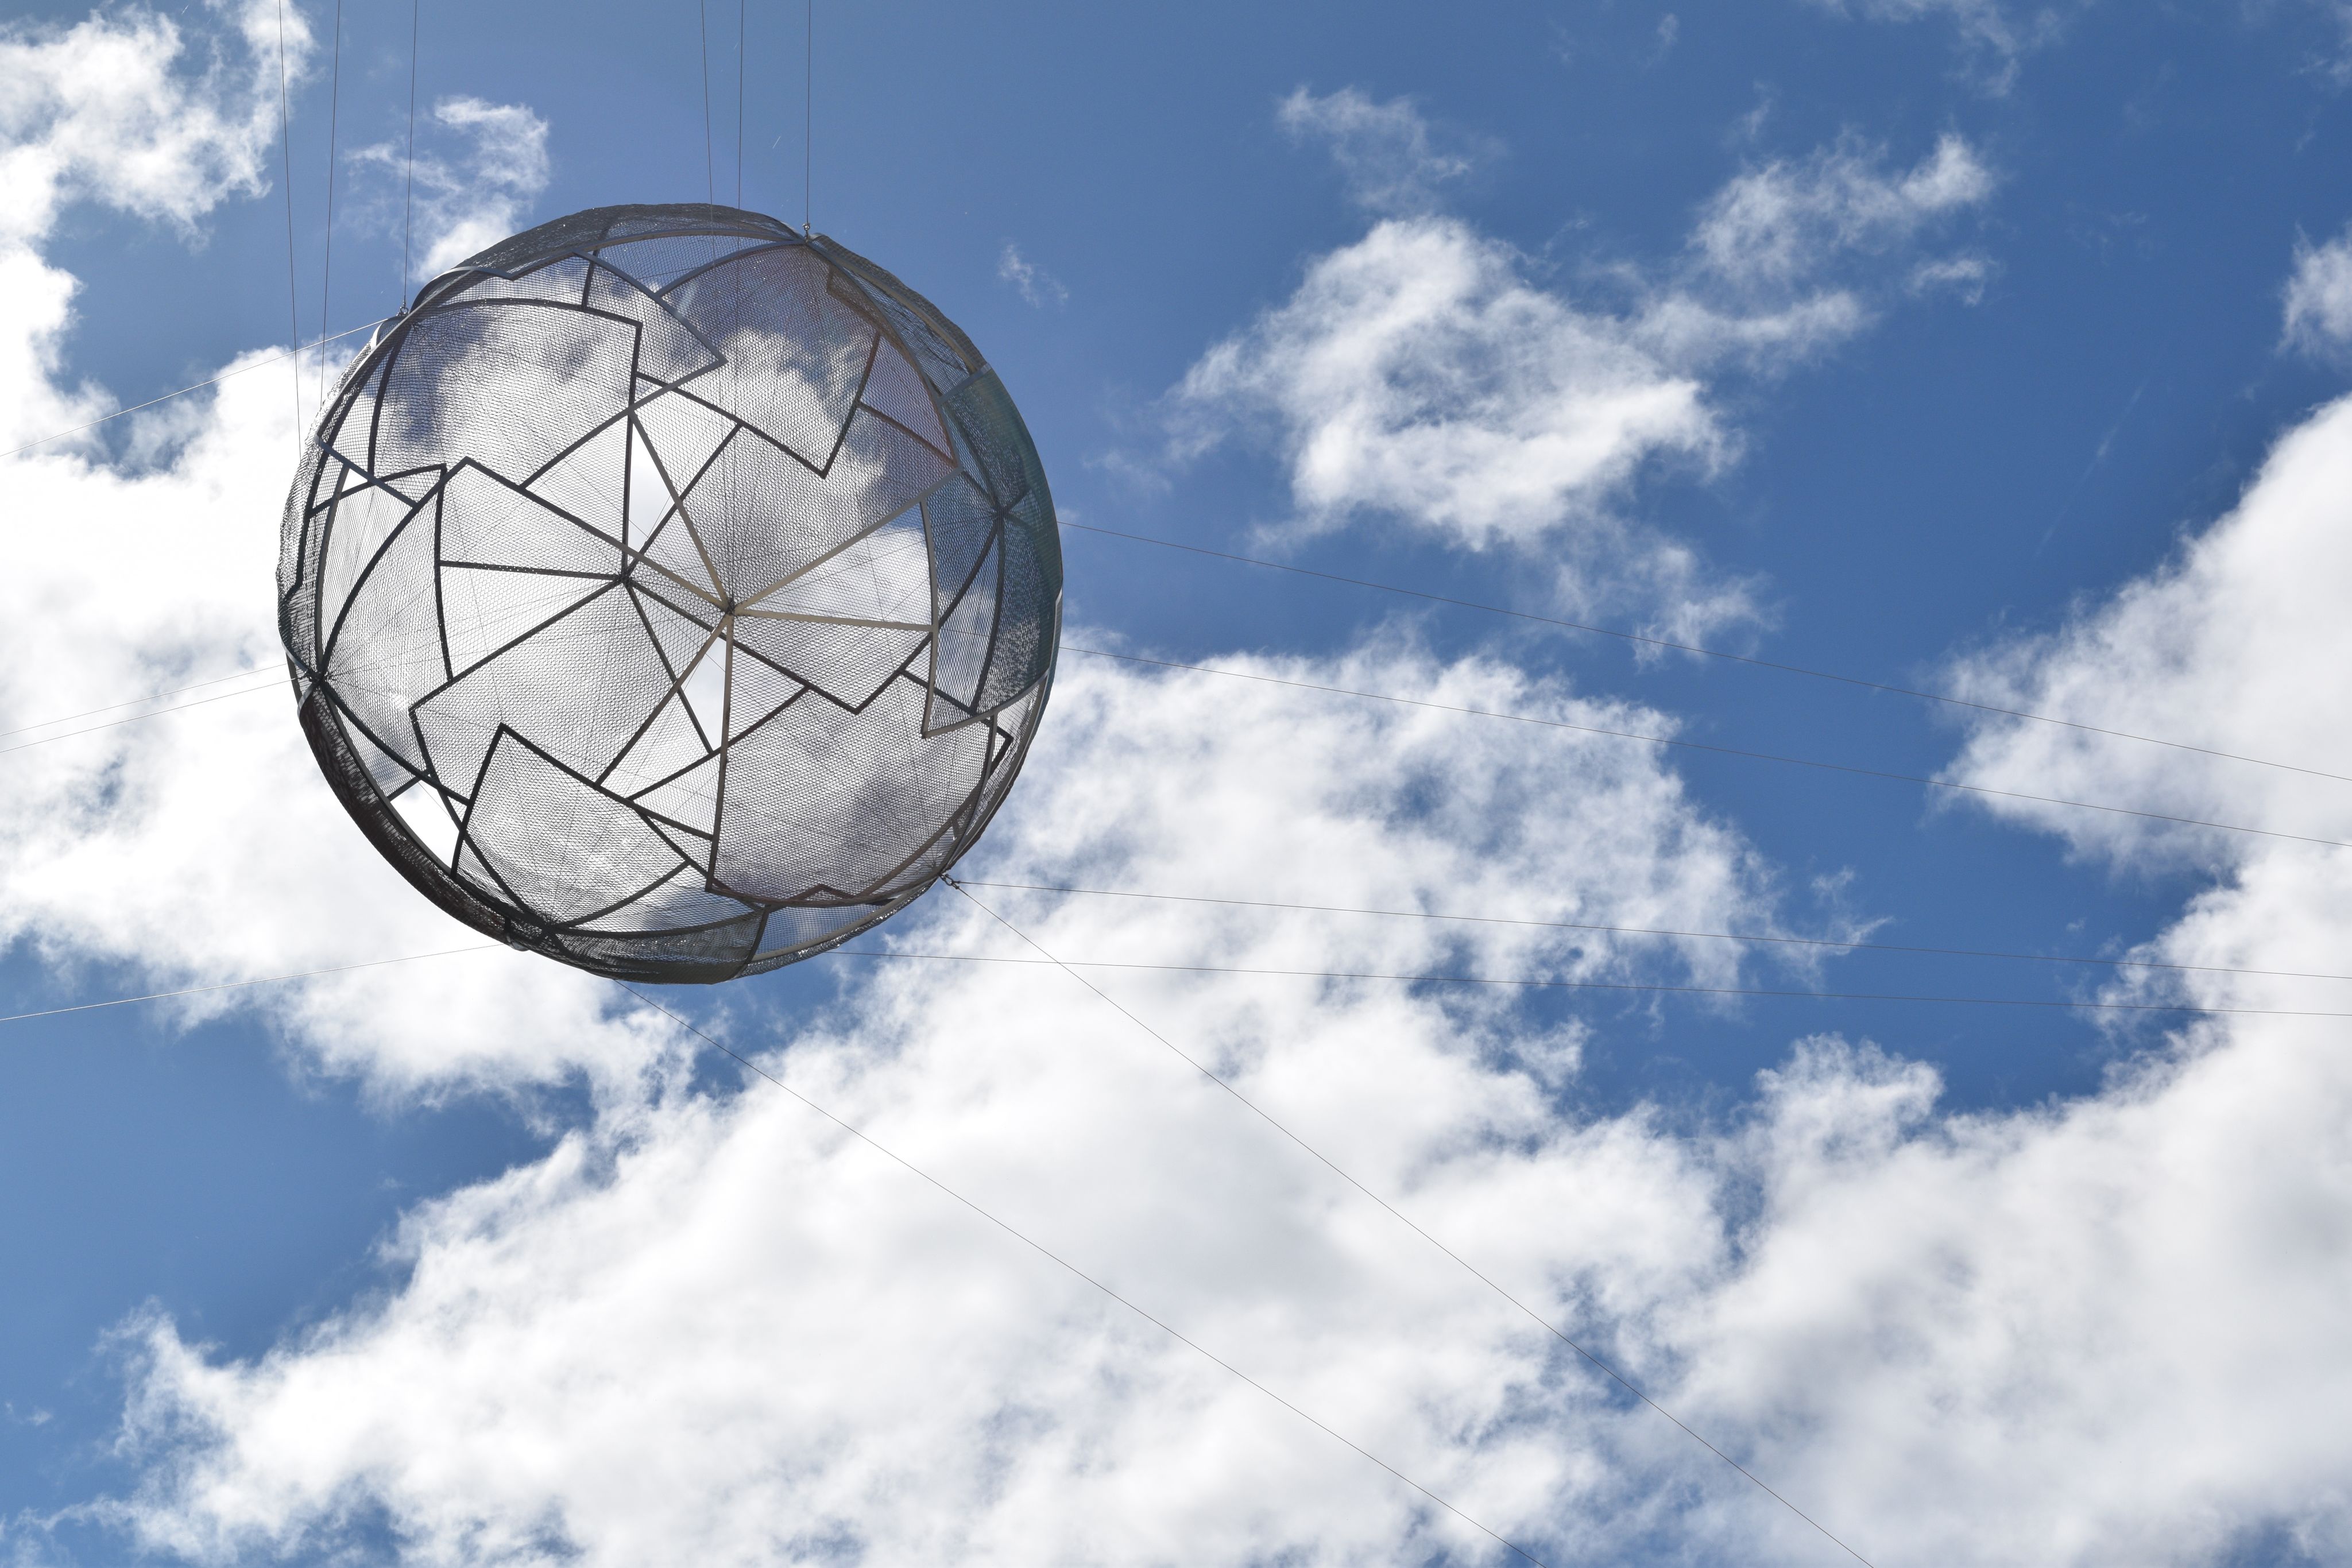 Geometric sphere suspended against blue sky with white, fluffy clouds.  